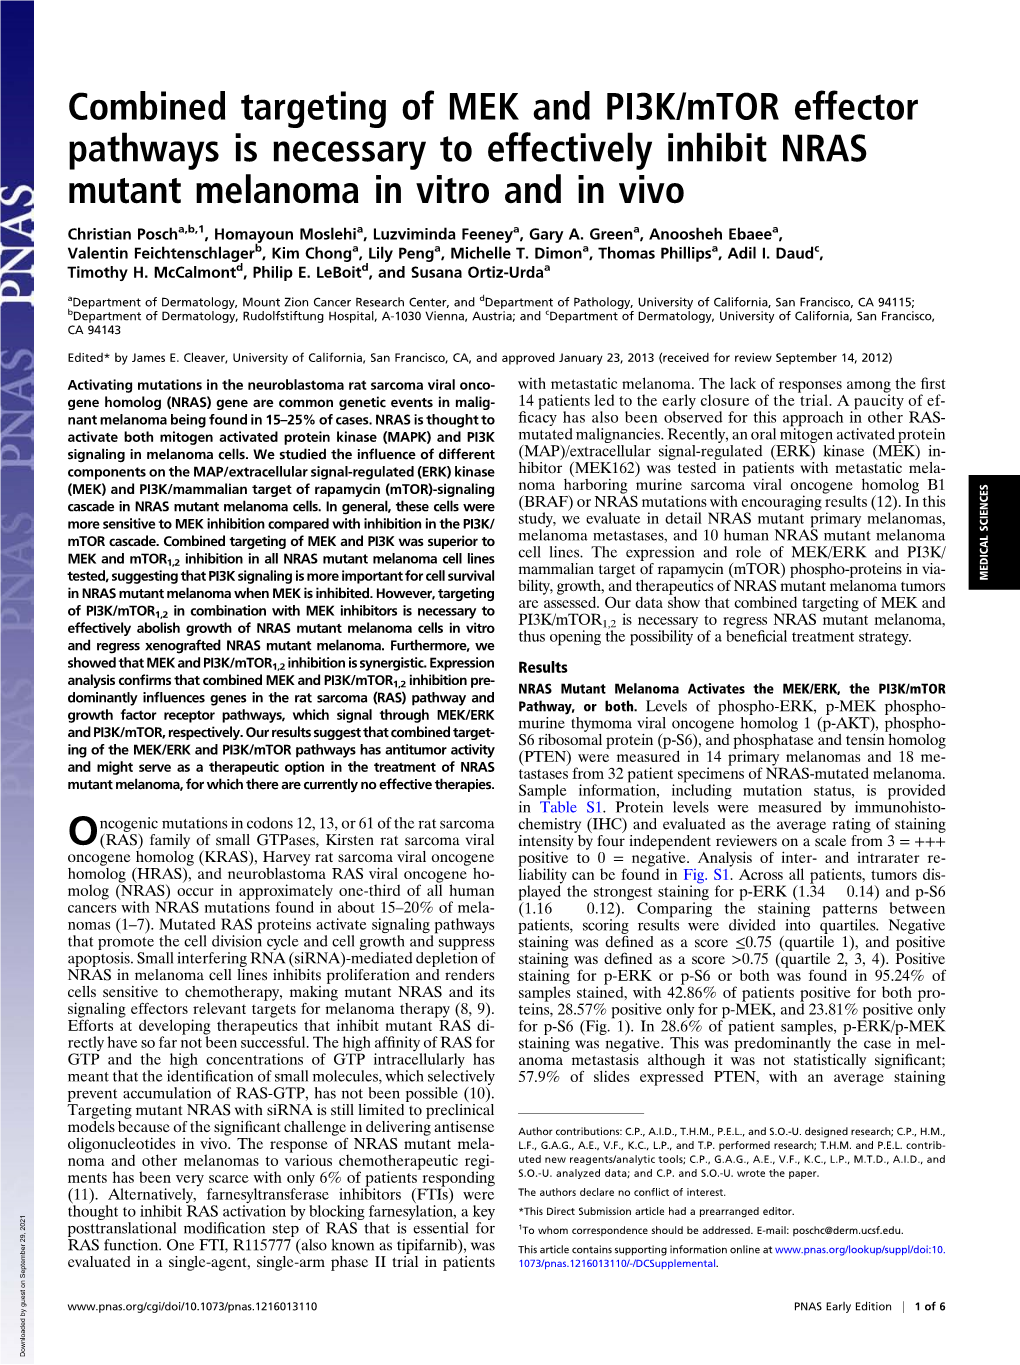 Combined Targeting of MEK and PI3K/Mtor Effector Pathways Is Necessary to Effectively Inhibit NRAS Mutant Melanoma in Vitro and in Vivo